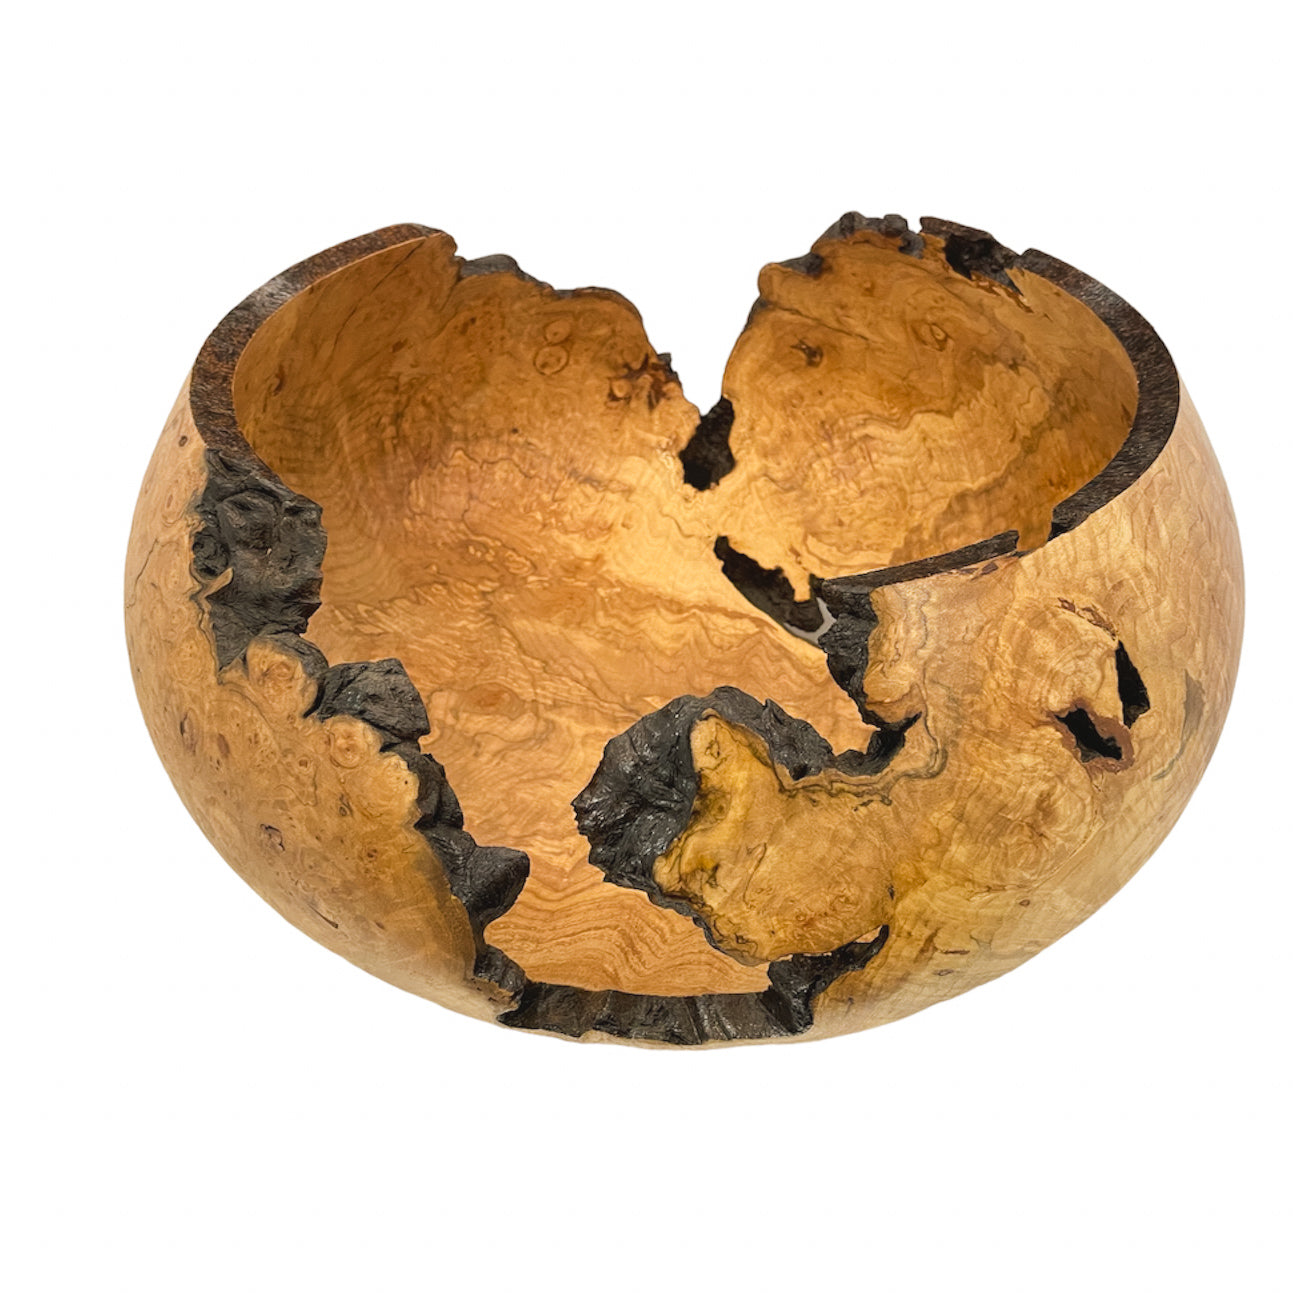 "NIAMH" LARGE MAPLE FOOTED BOWL